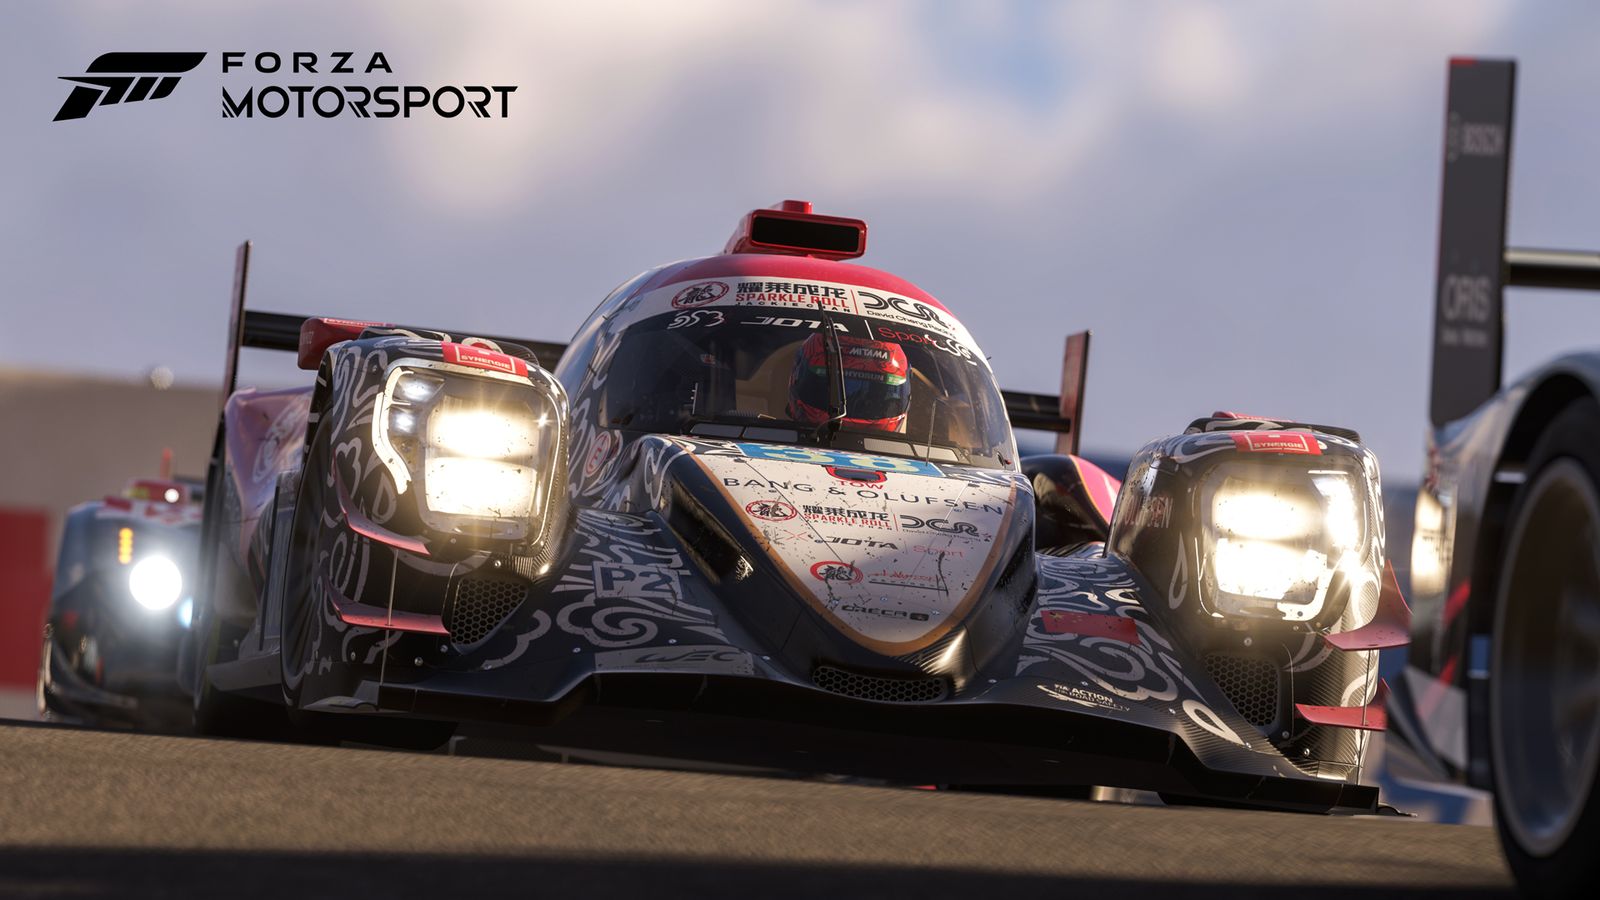 Forza Motorsport reportedly delayed